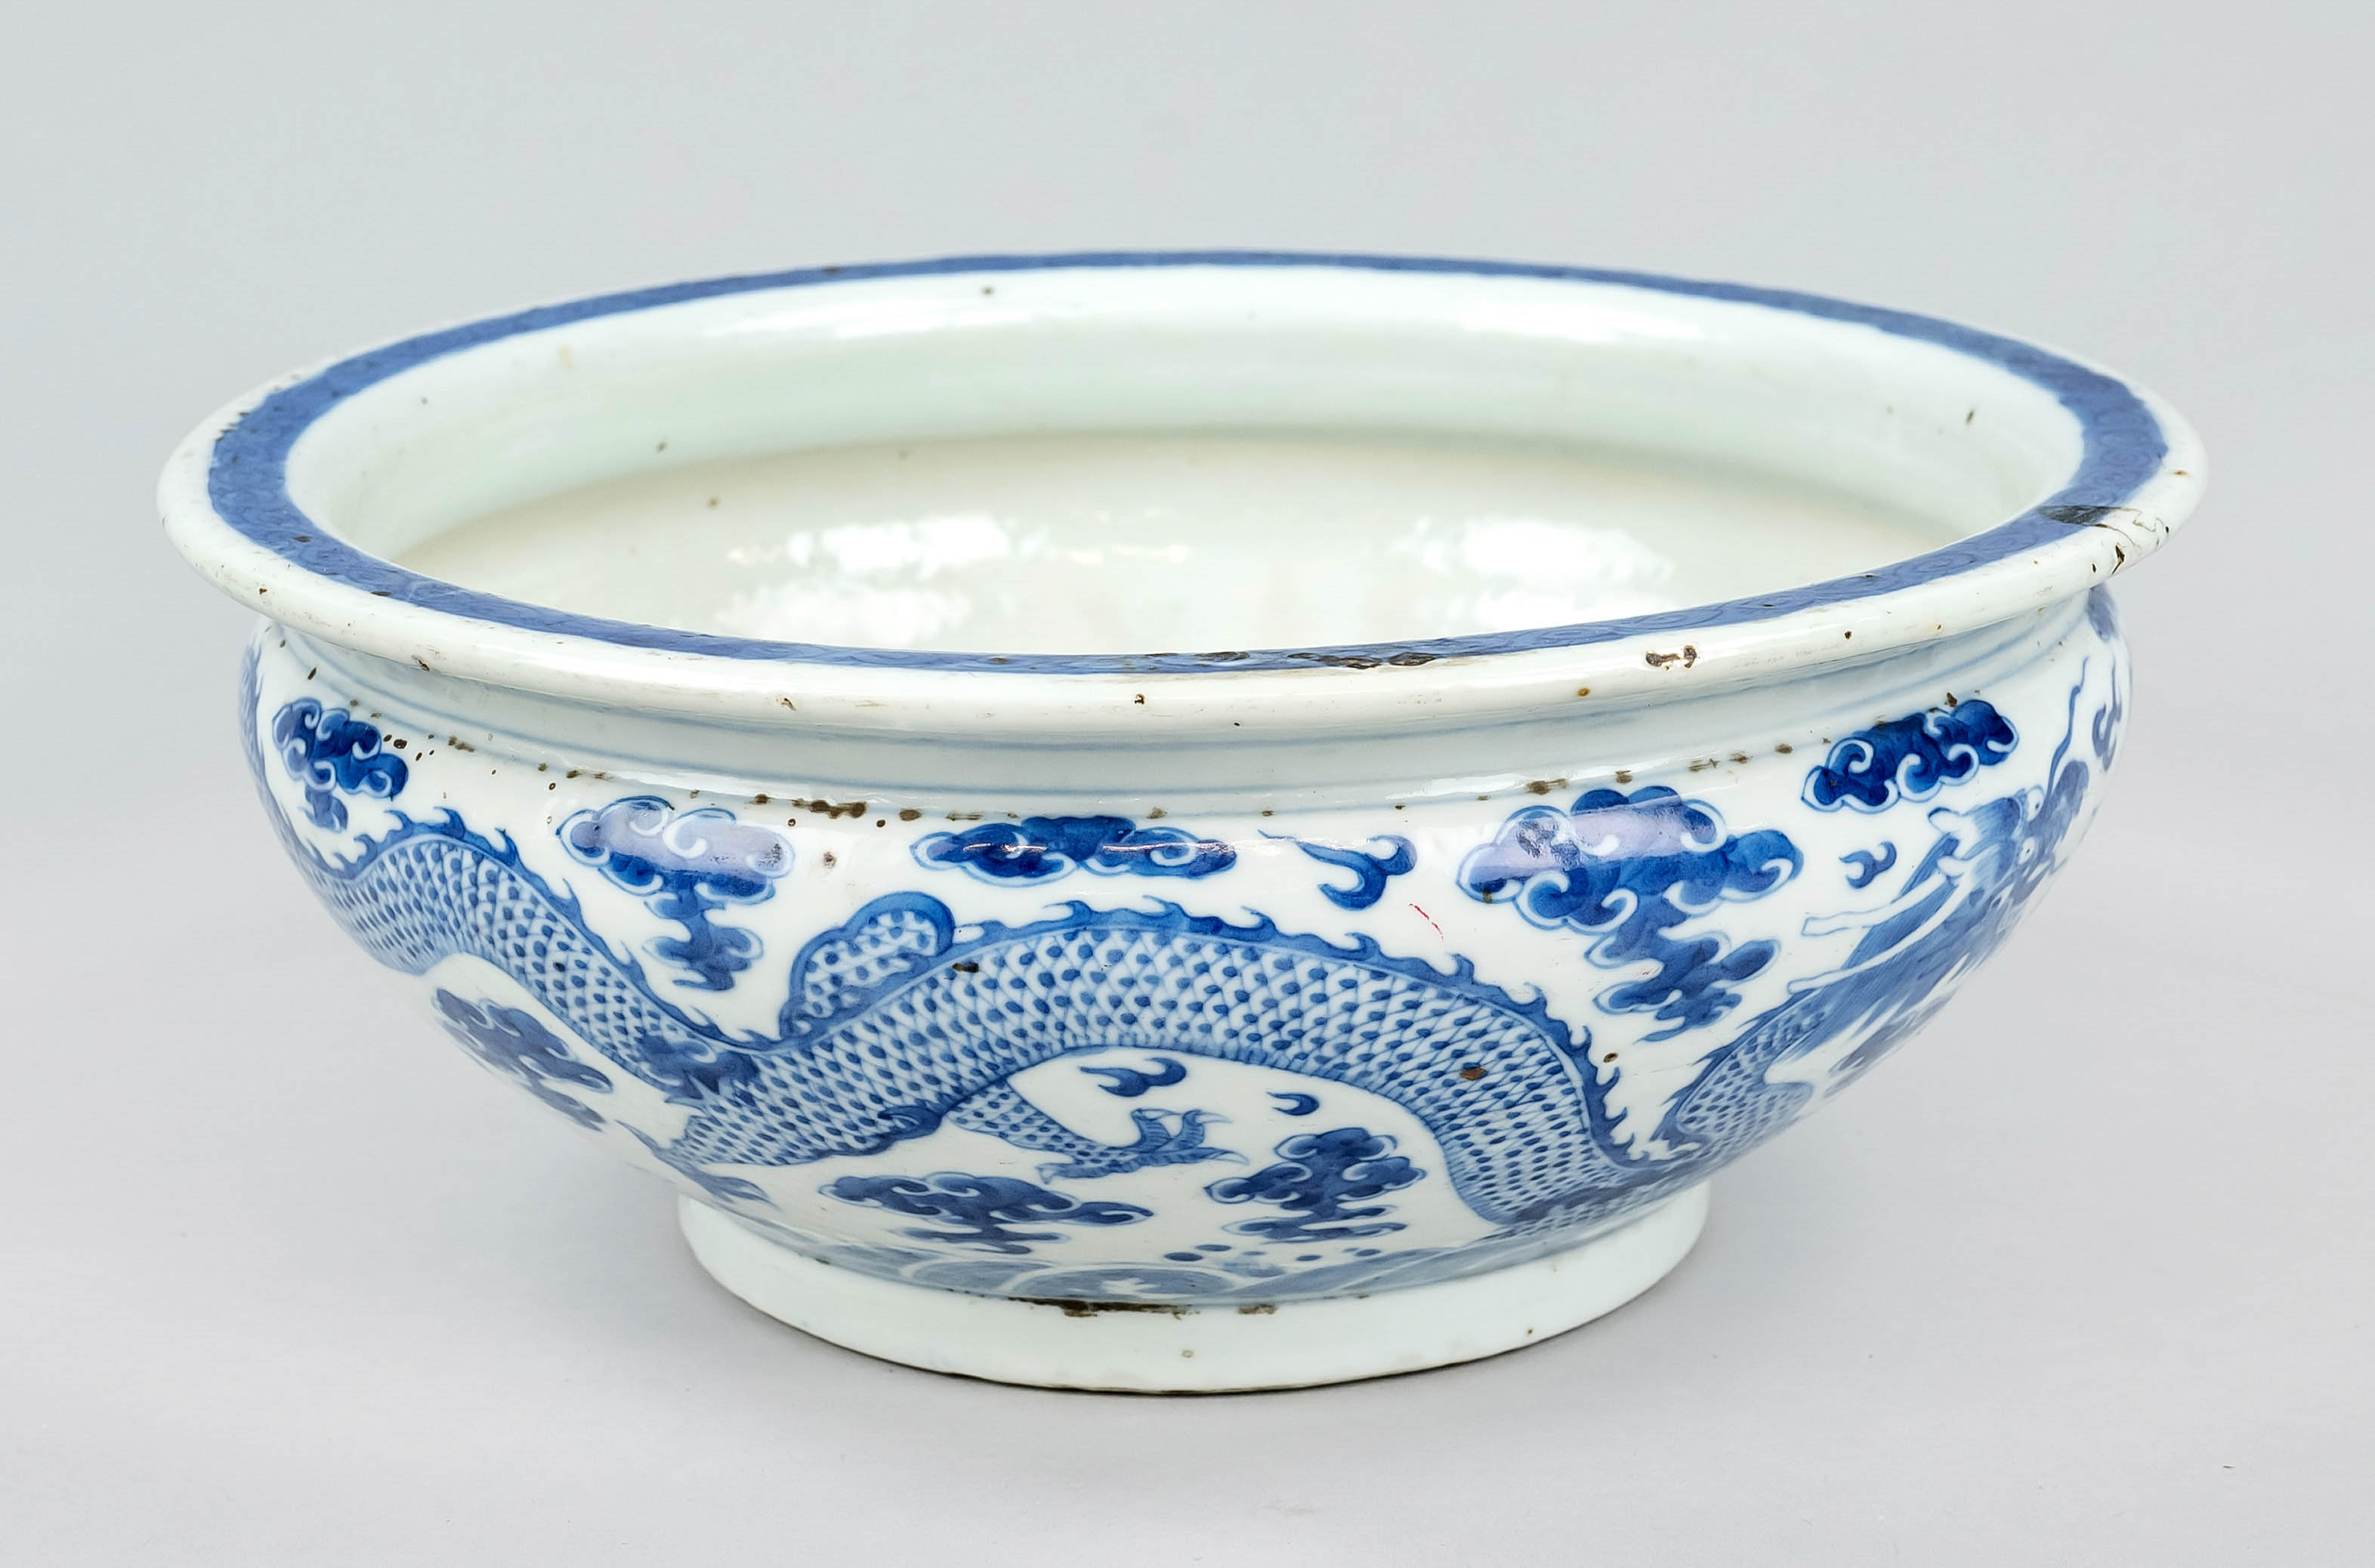 Large dragon bowl, China, probably Qing dynasty(1644-1911) 18th/19th century, porcelain with